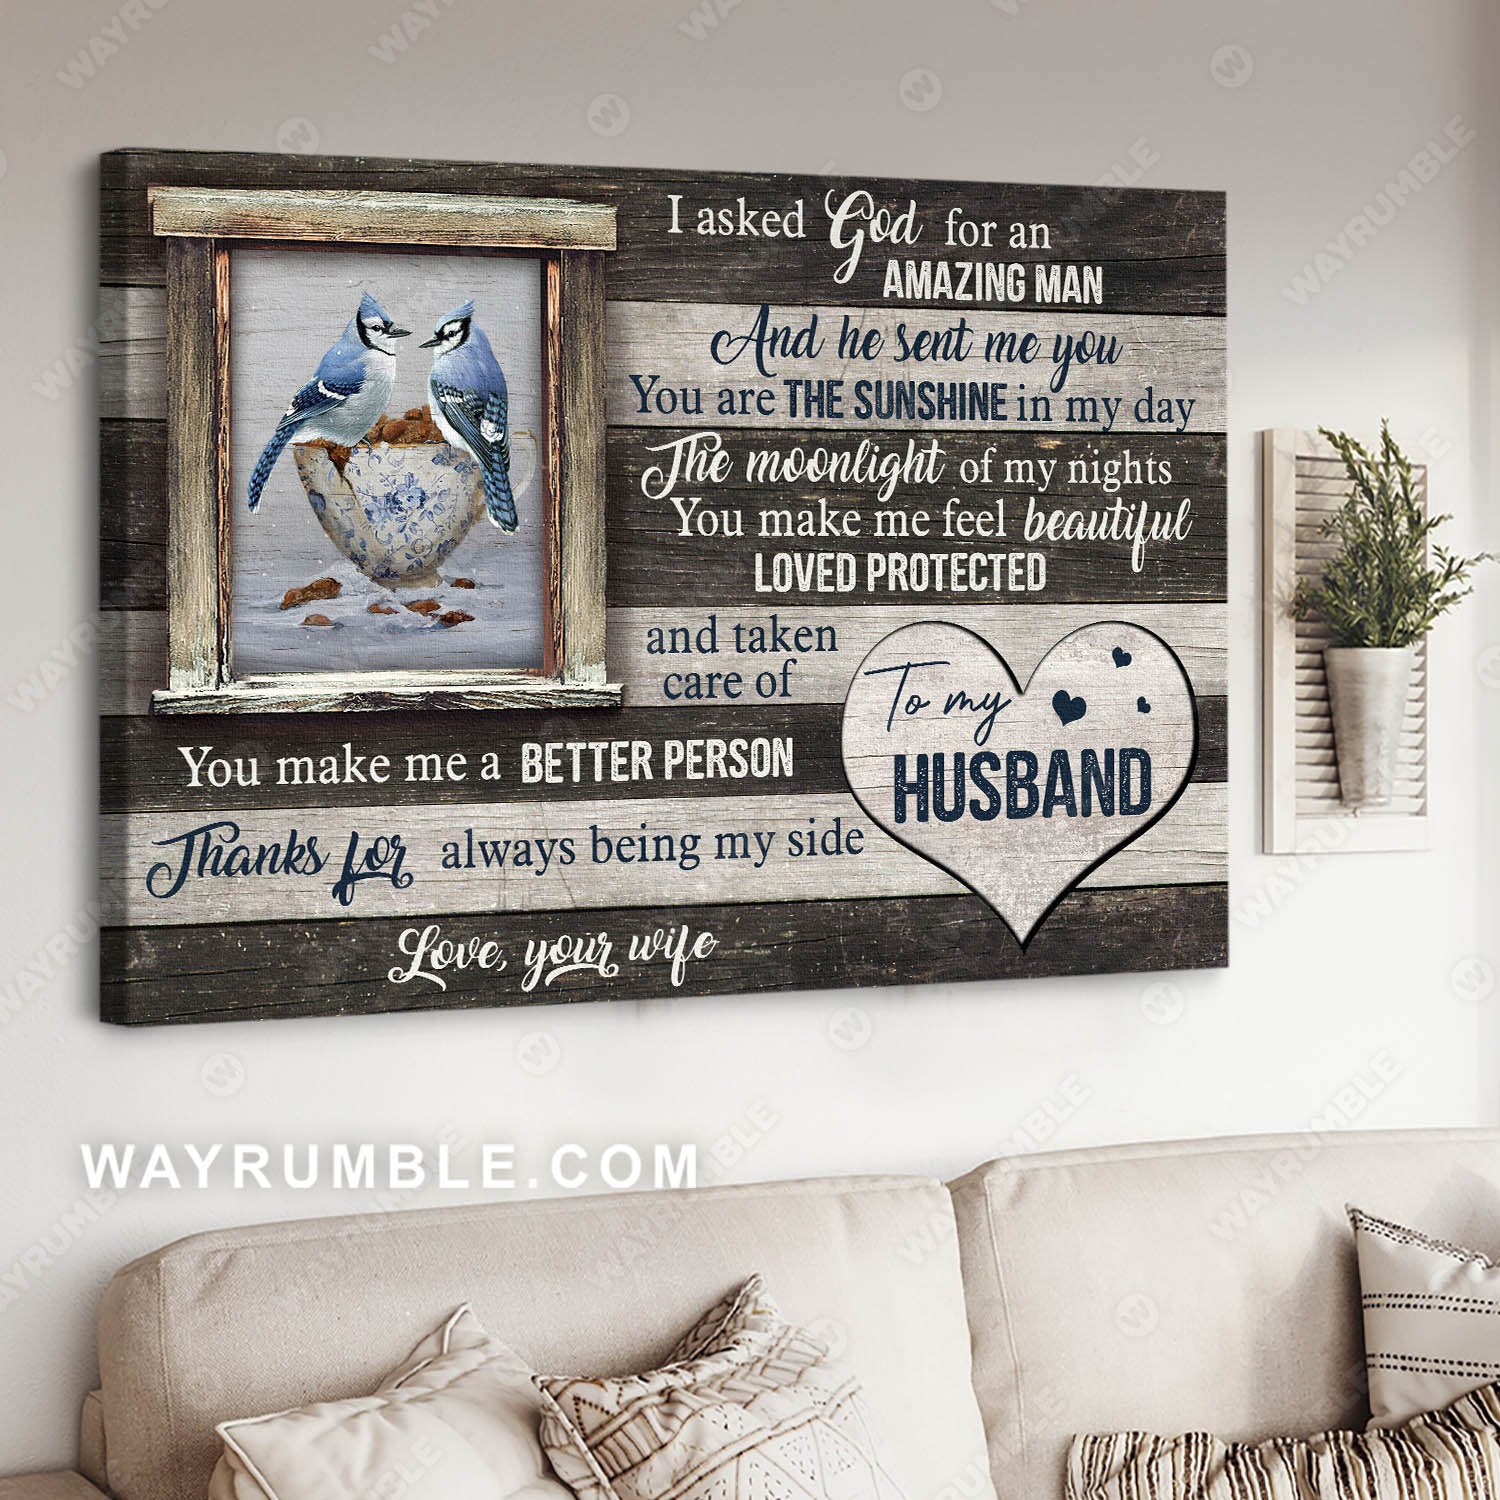 To my husband, Blue jay couple, Window frame, You make me a better person - Couple Landscape Canvas Prints, Wall Art